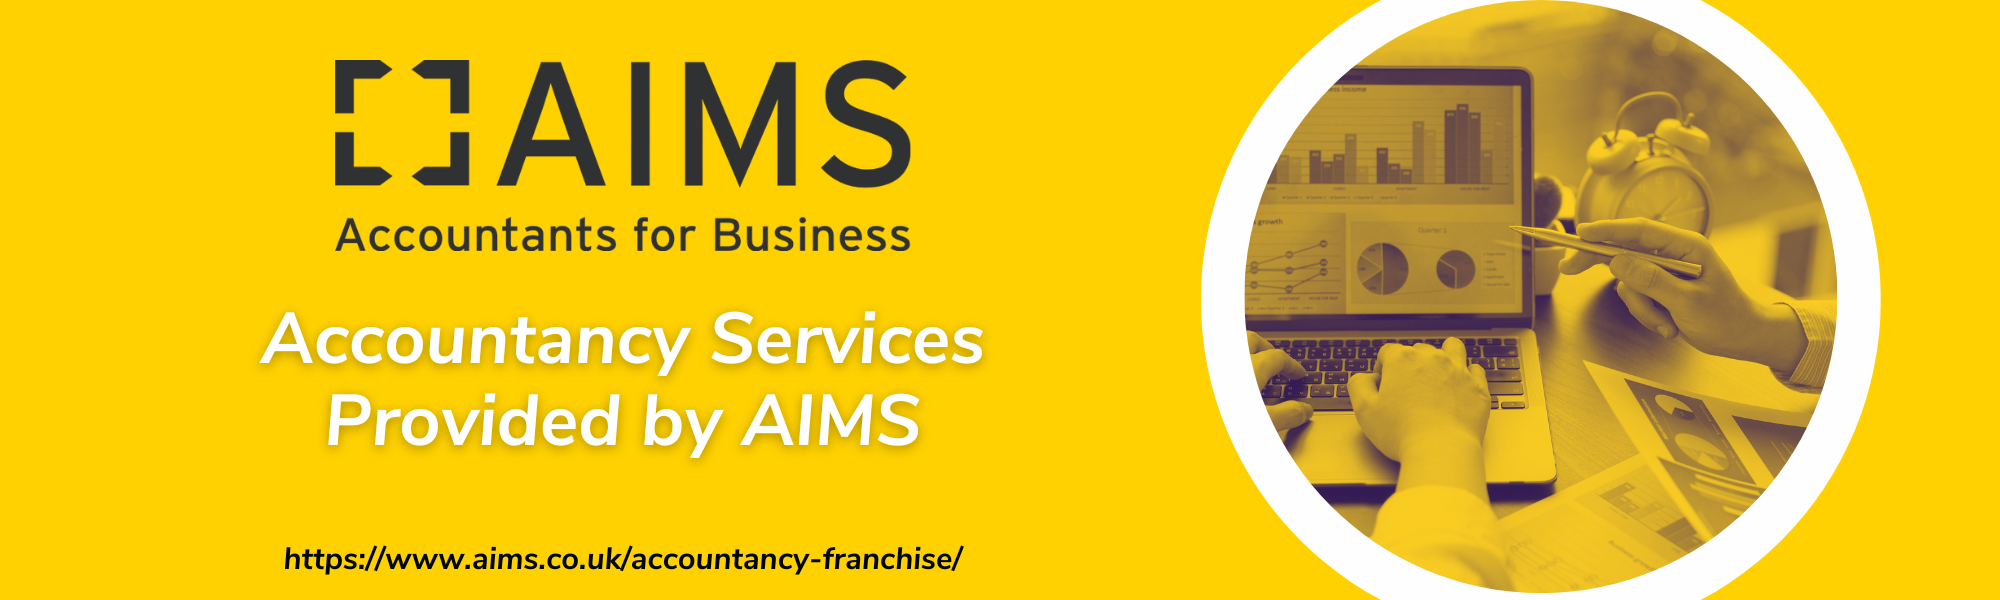 Accountancy services provided by AIMS banner